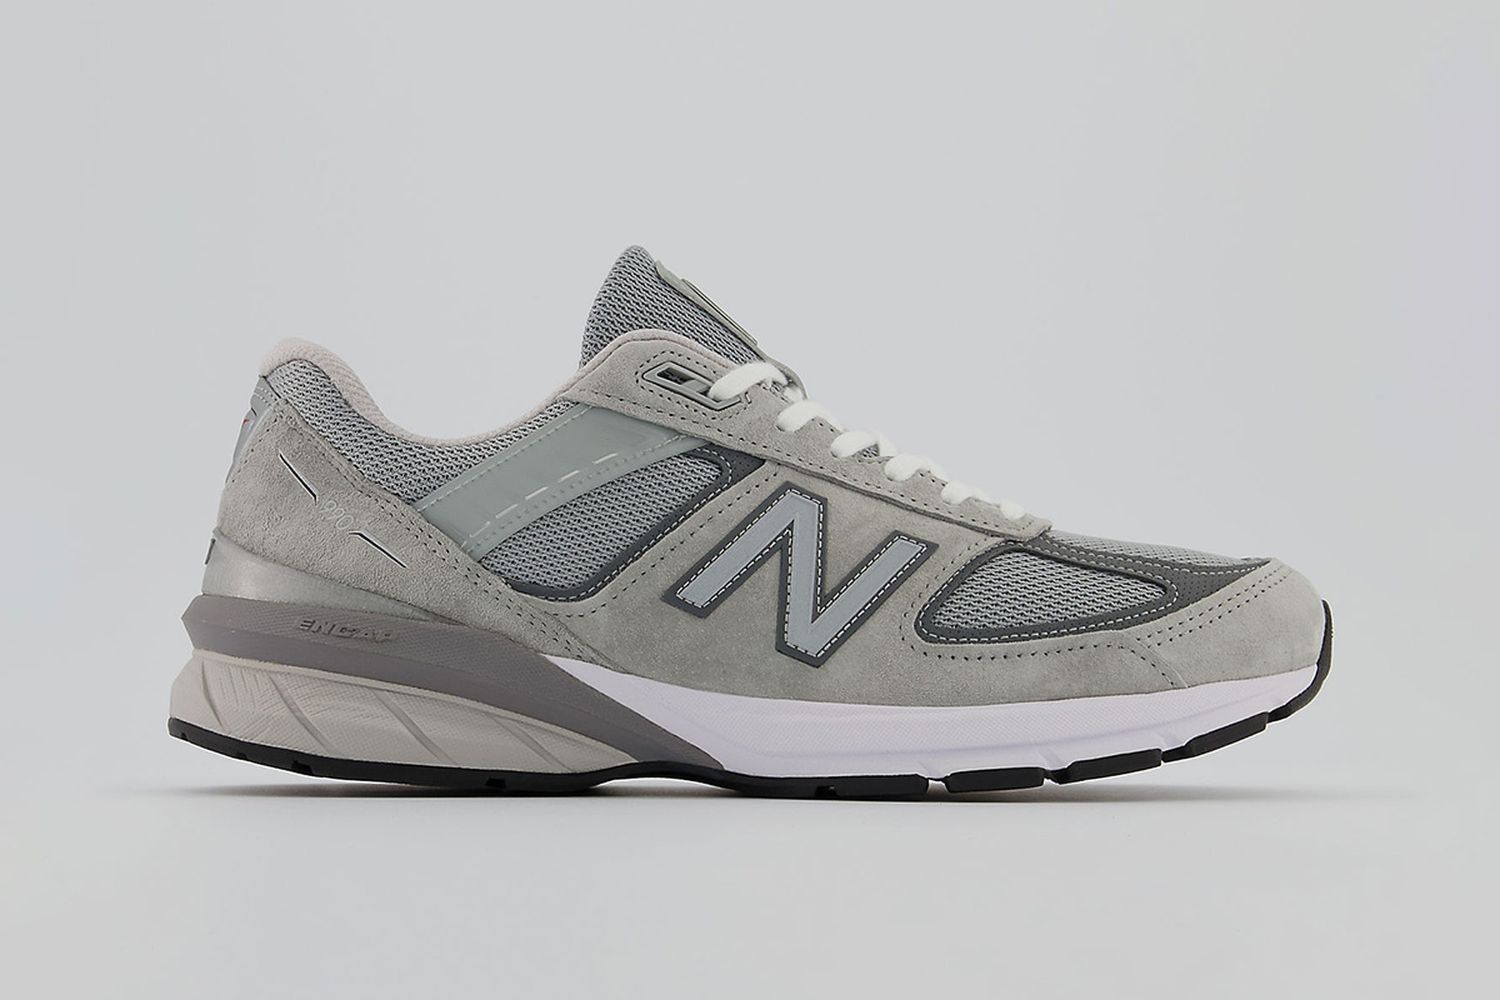 Sideboard did not notice First 10 of the Best Grey New Balance Sneakers